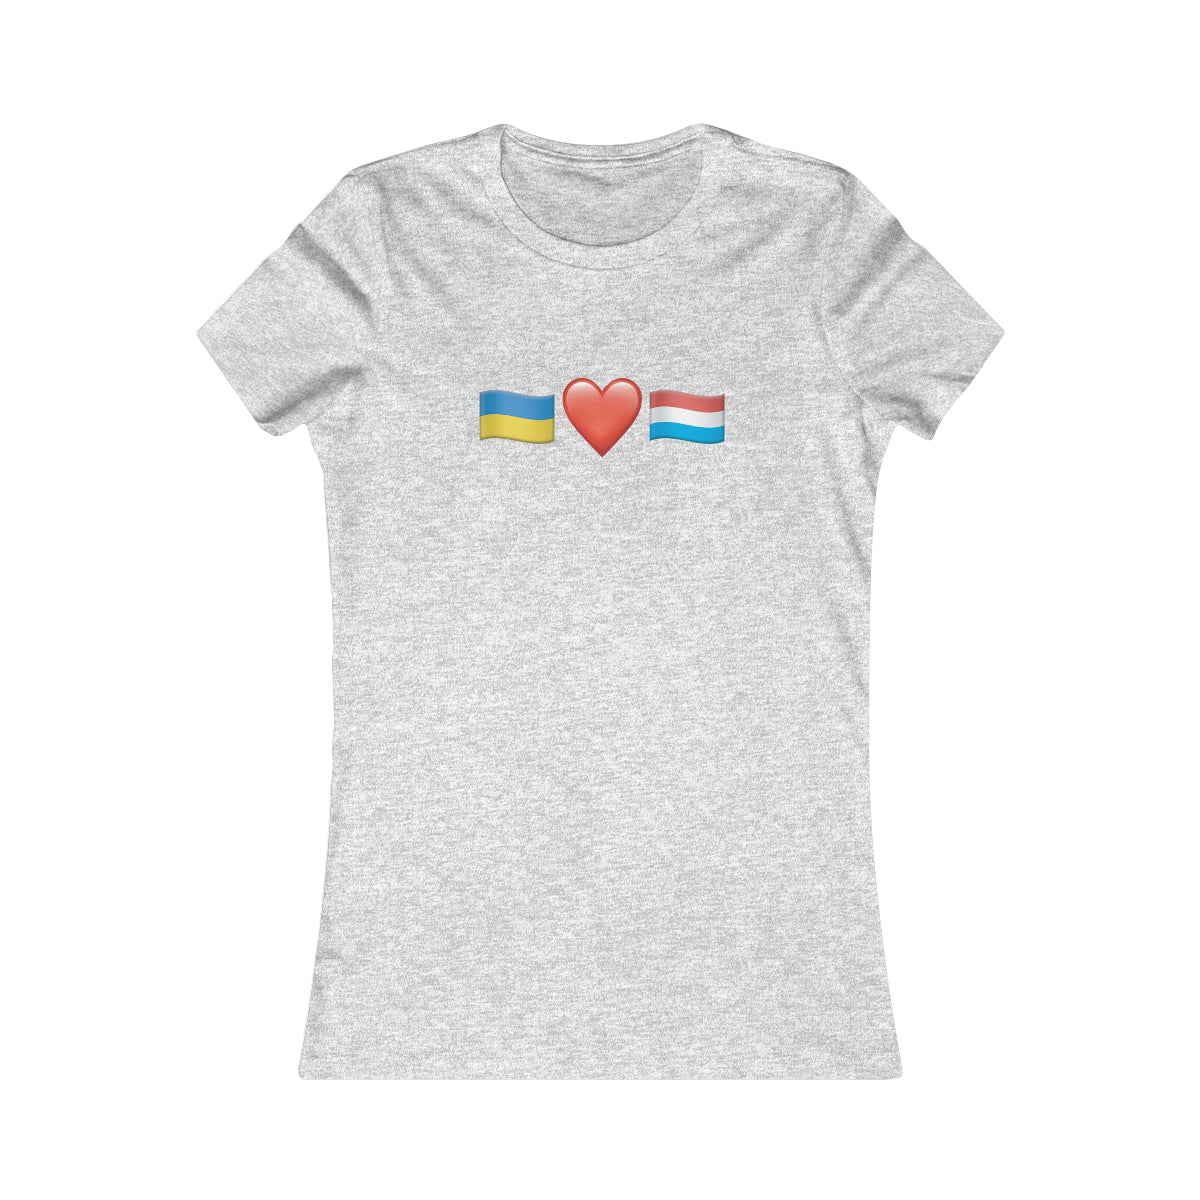 Luxembourg's Support - Women's Favorite Tee